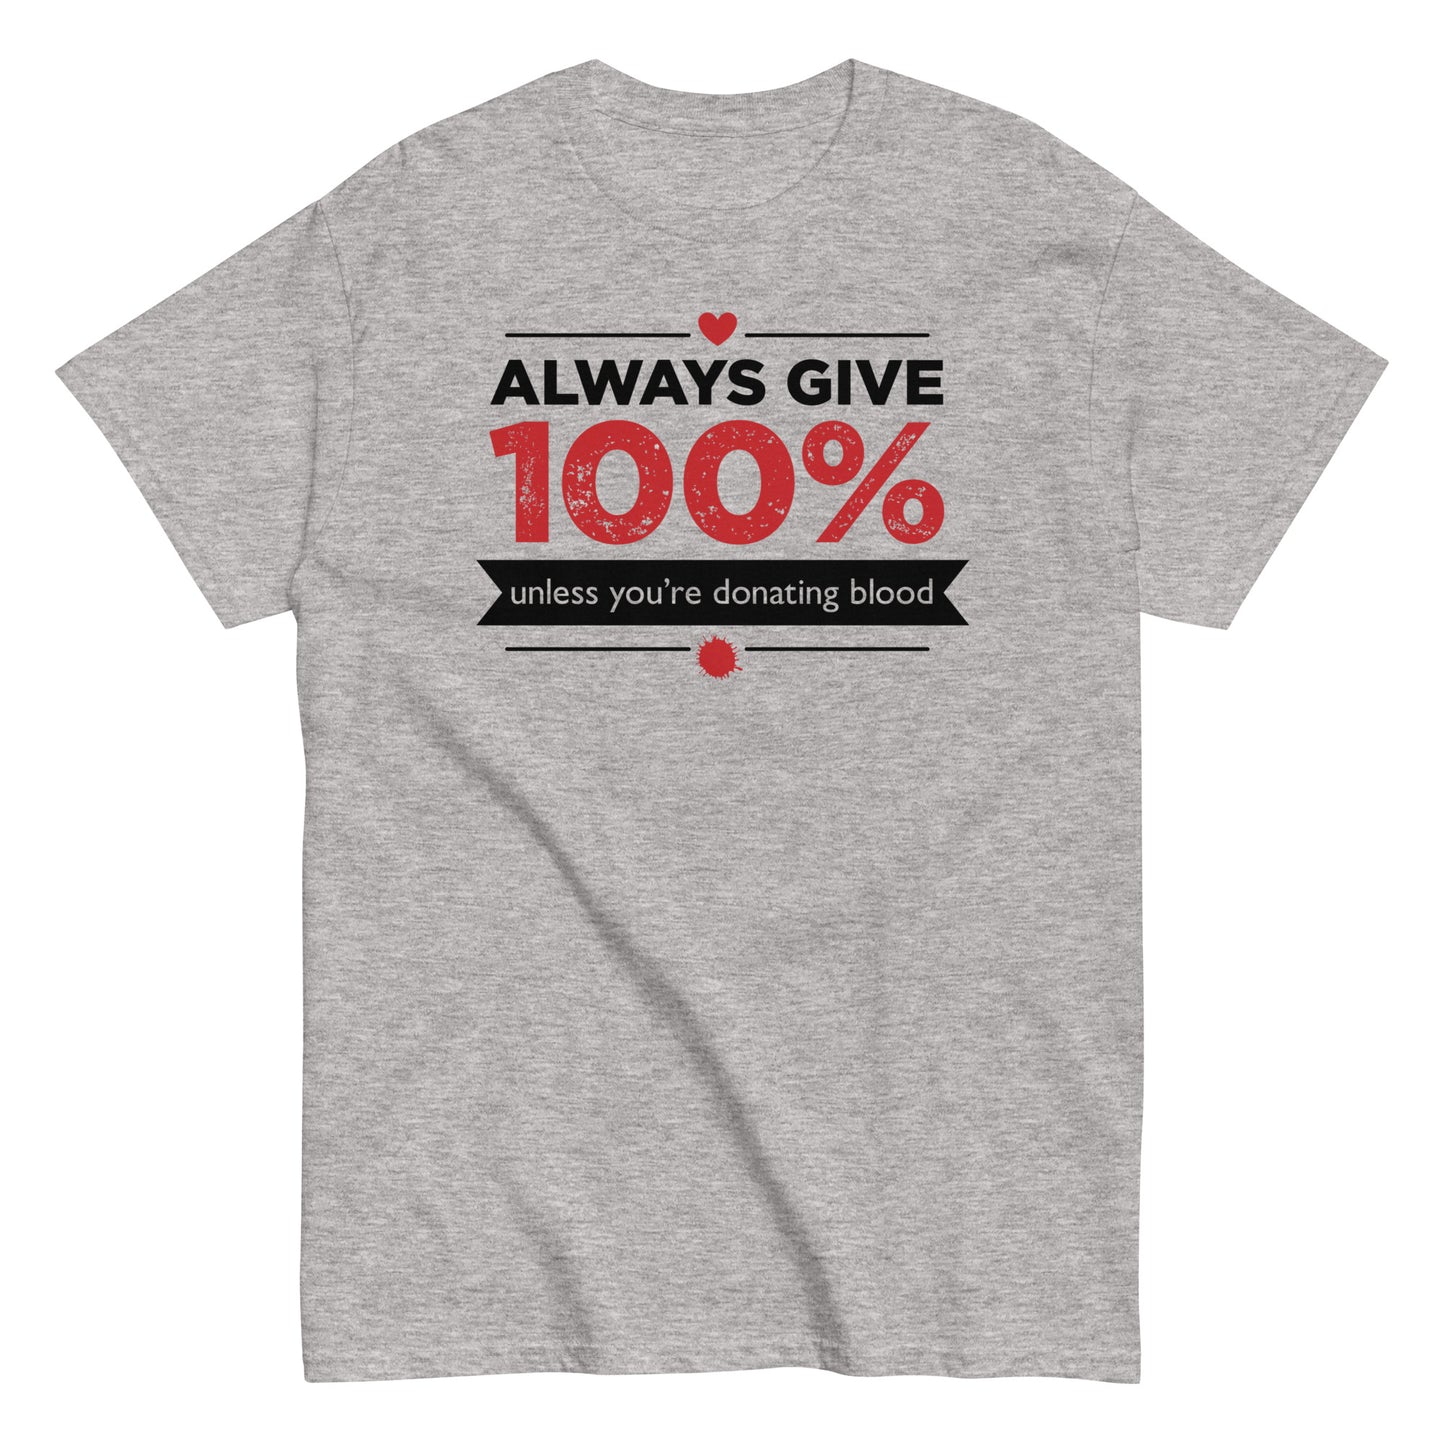 Always Give 100%, Unless You're Donating Blood Men's Classic Tee